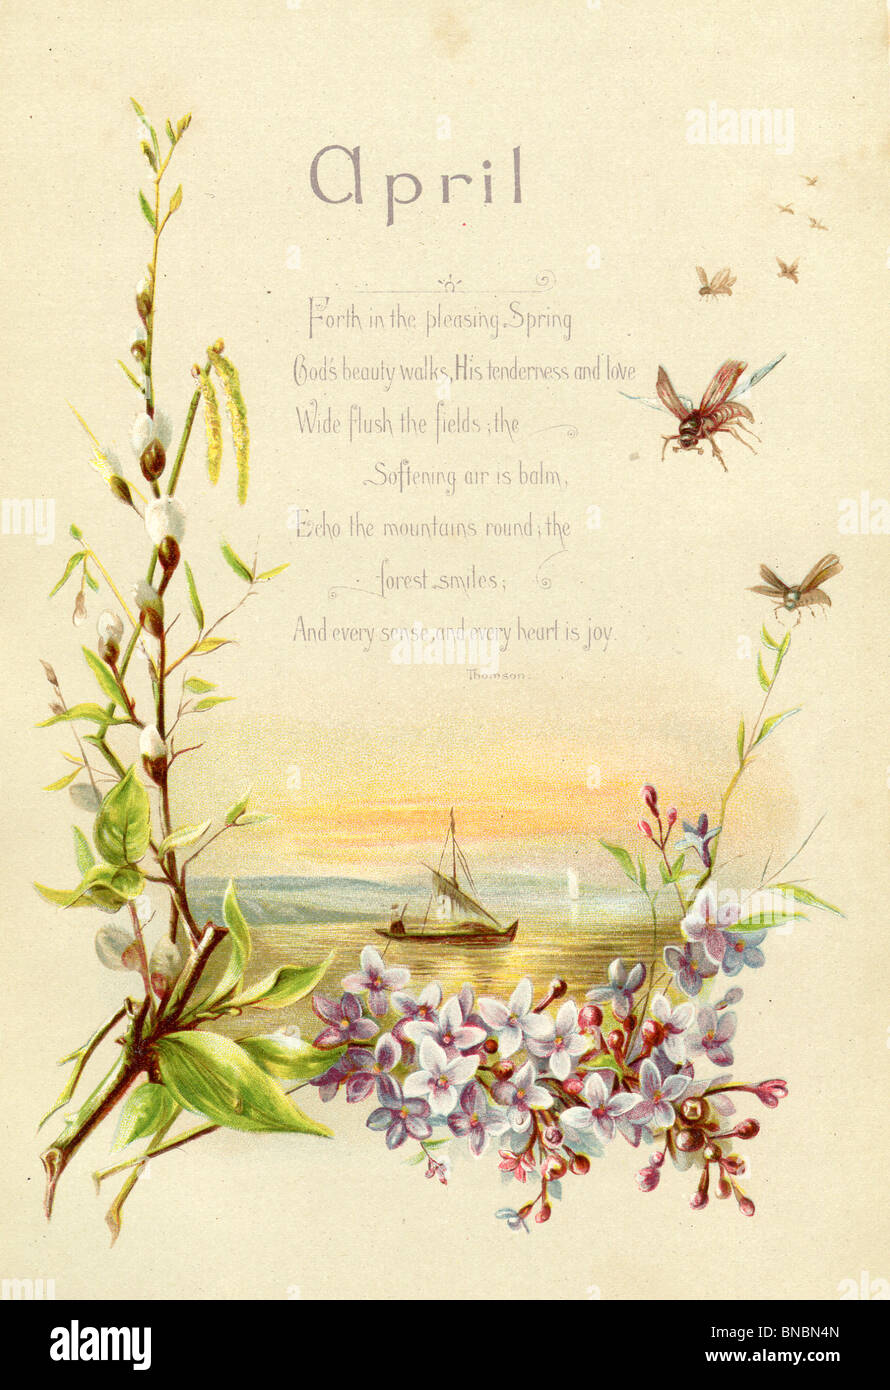 April Poem with Blossom and Willow Stock Photo